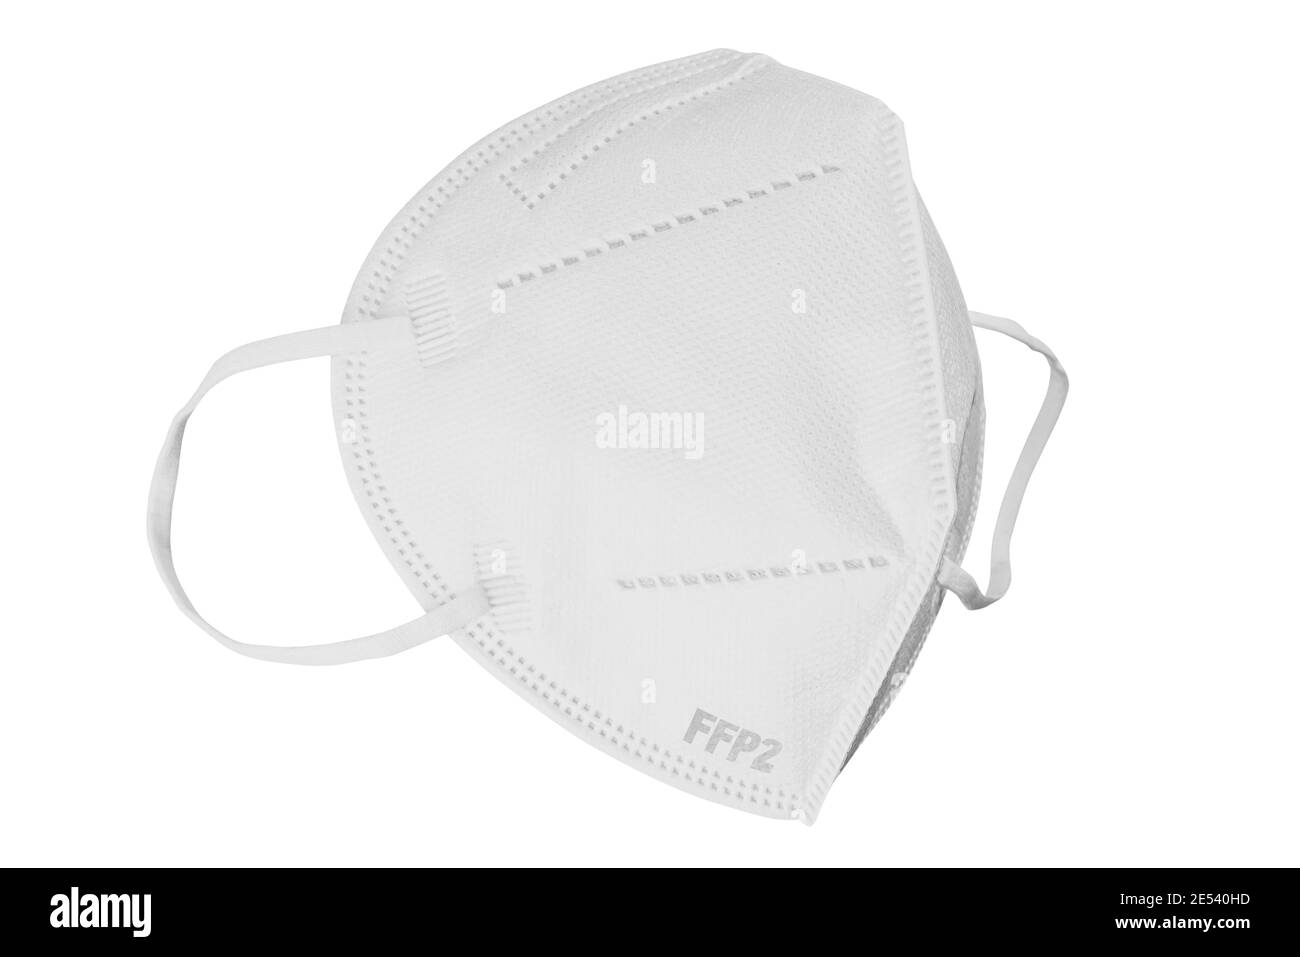 FFP2 respirator face mask isolated on white background, protectiv face covering to prevent coronavirus infection Stock Photo